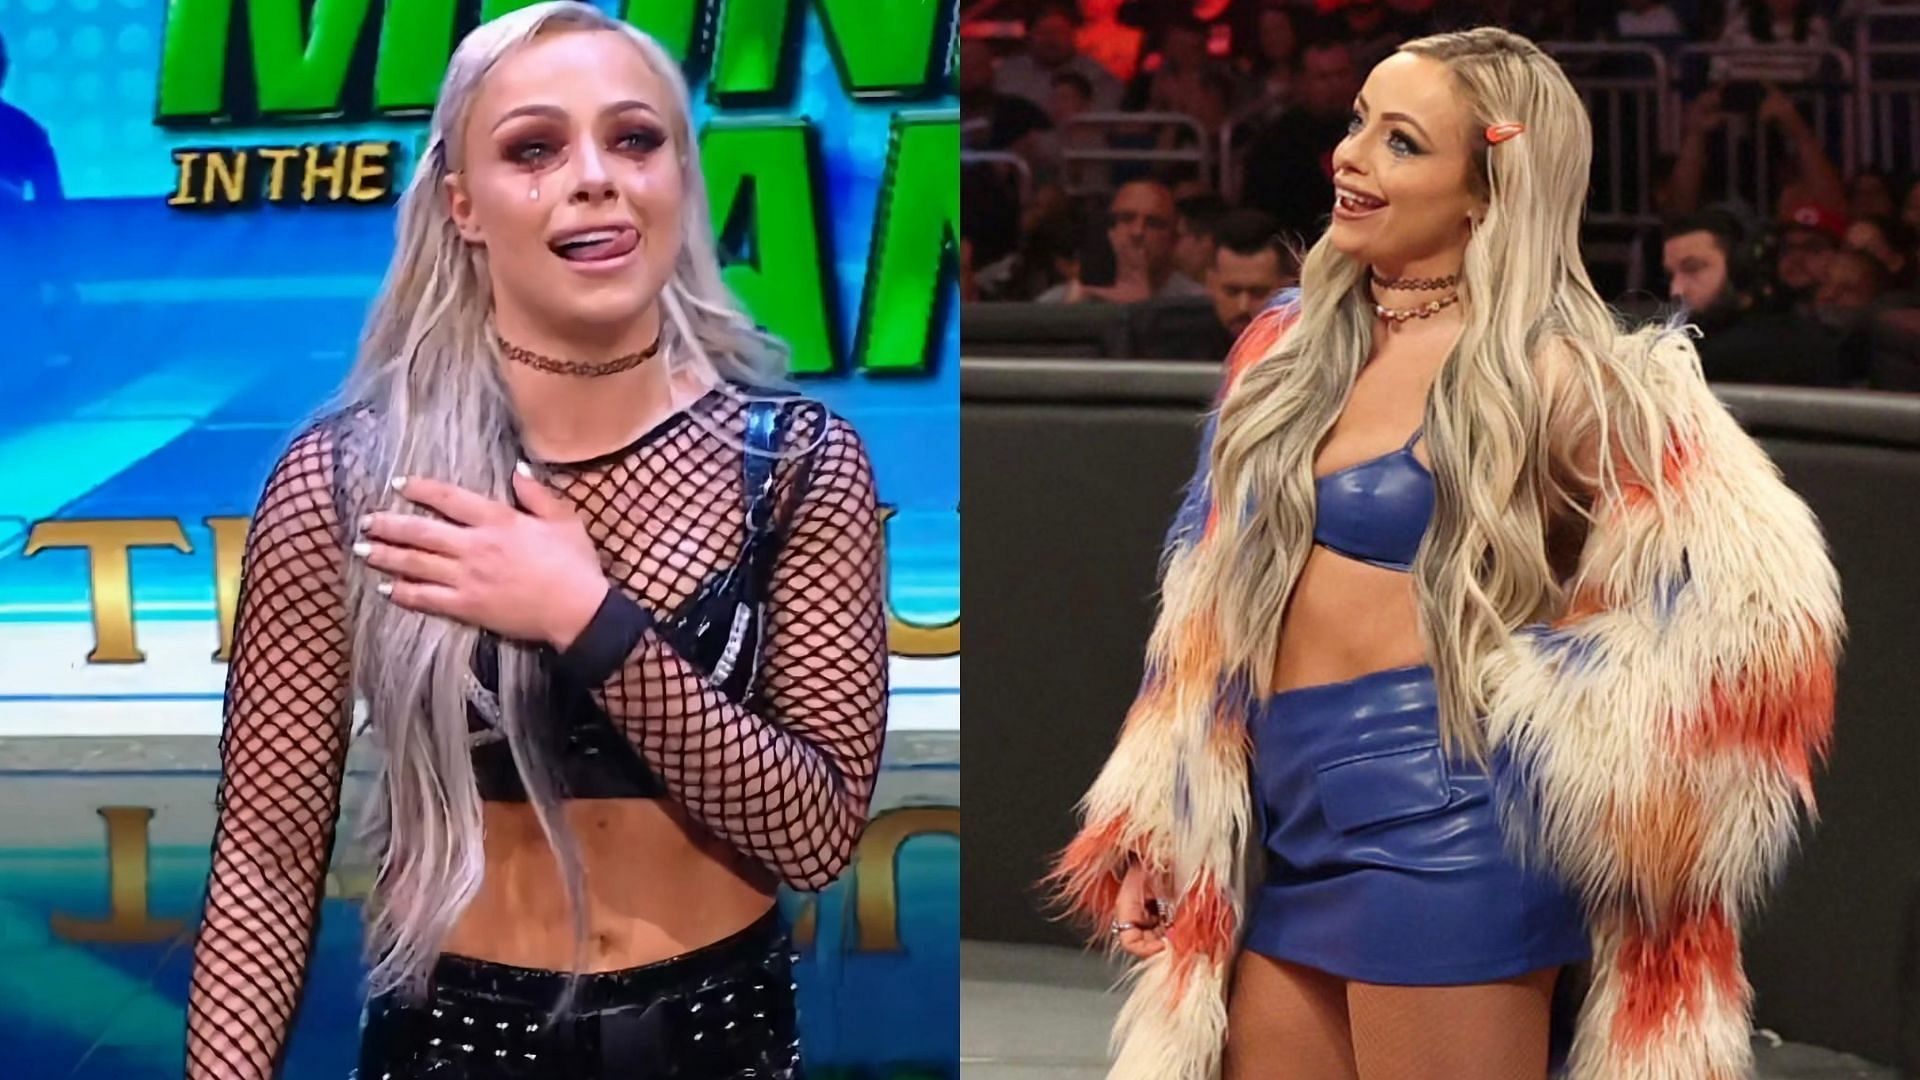 Liv Morgan received a wholesome birthday wish from CJ Perry